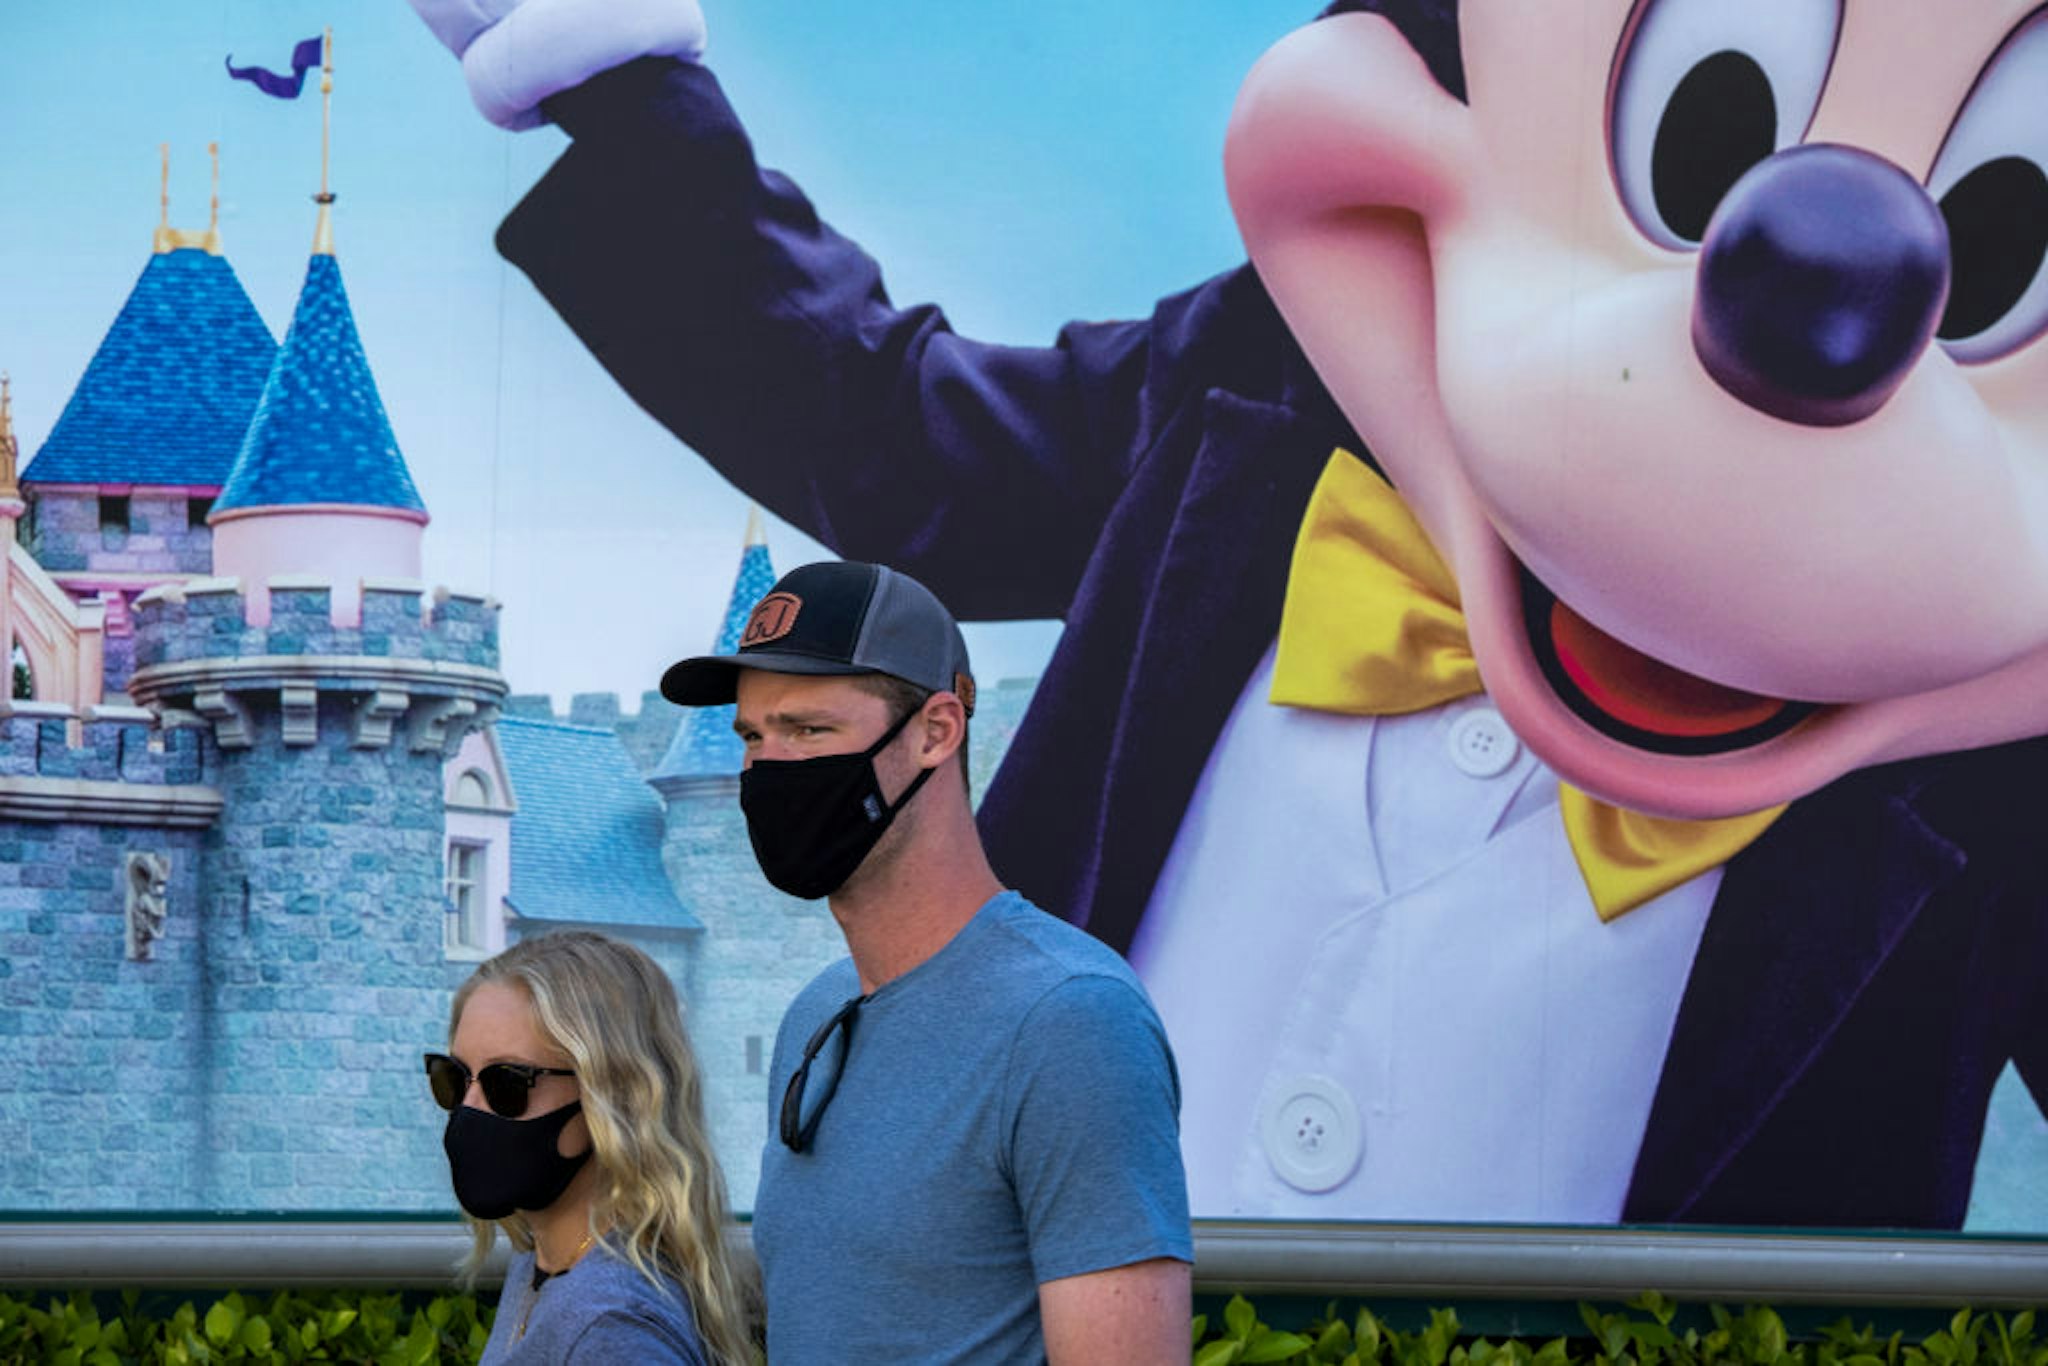 People enter Disneyland Park as it reopens for the first time since the COVID 19 pandemic forced the park to shut down last year on April 30, 2021 in Anaheim, California.